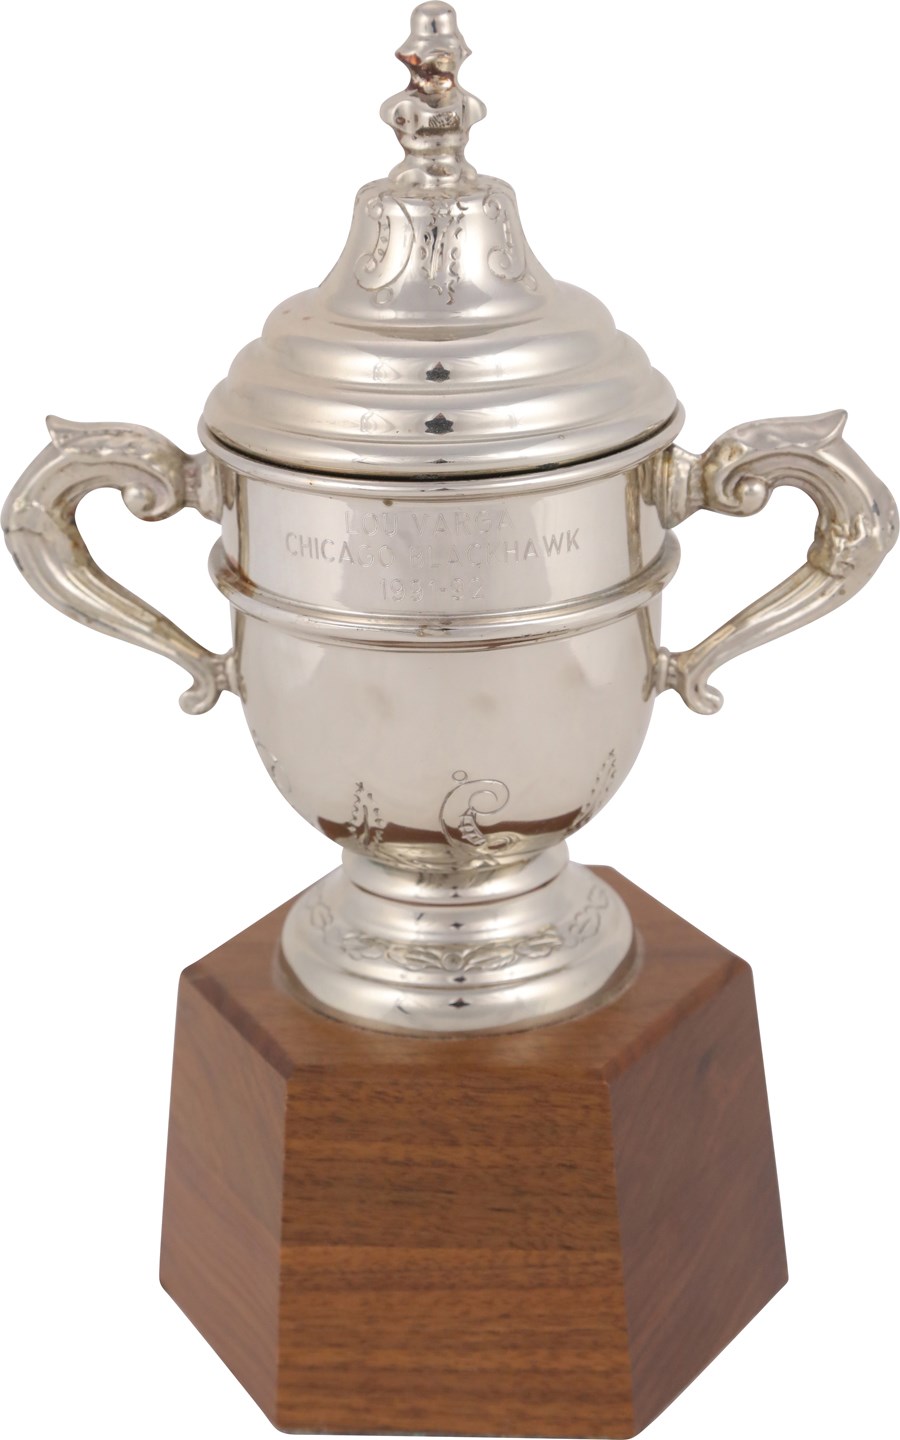 Hockey - 1991-92 Chicago Blackhawks Clarence Campbell Trophy